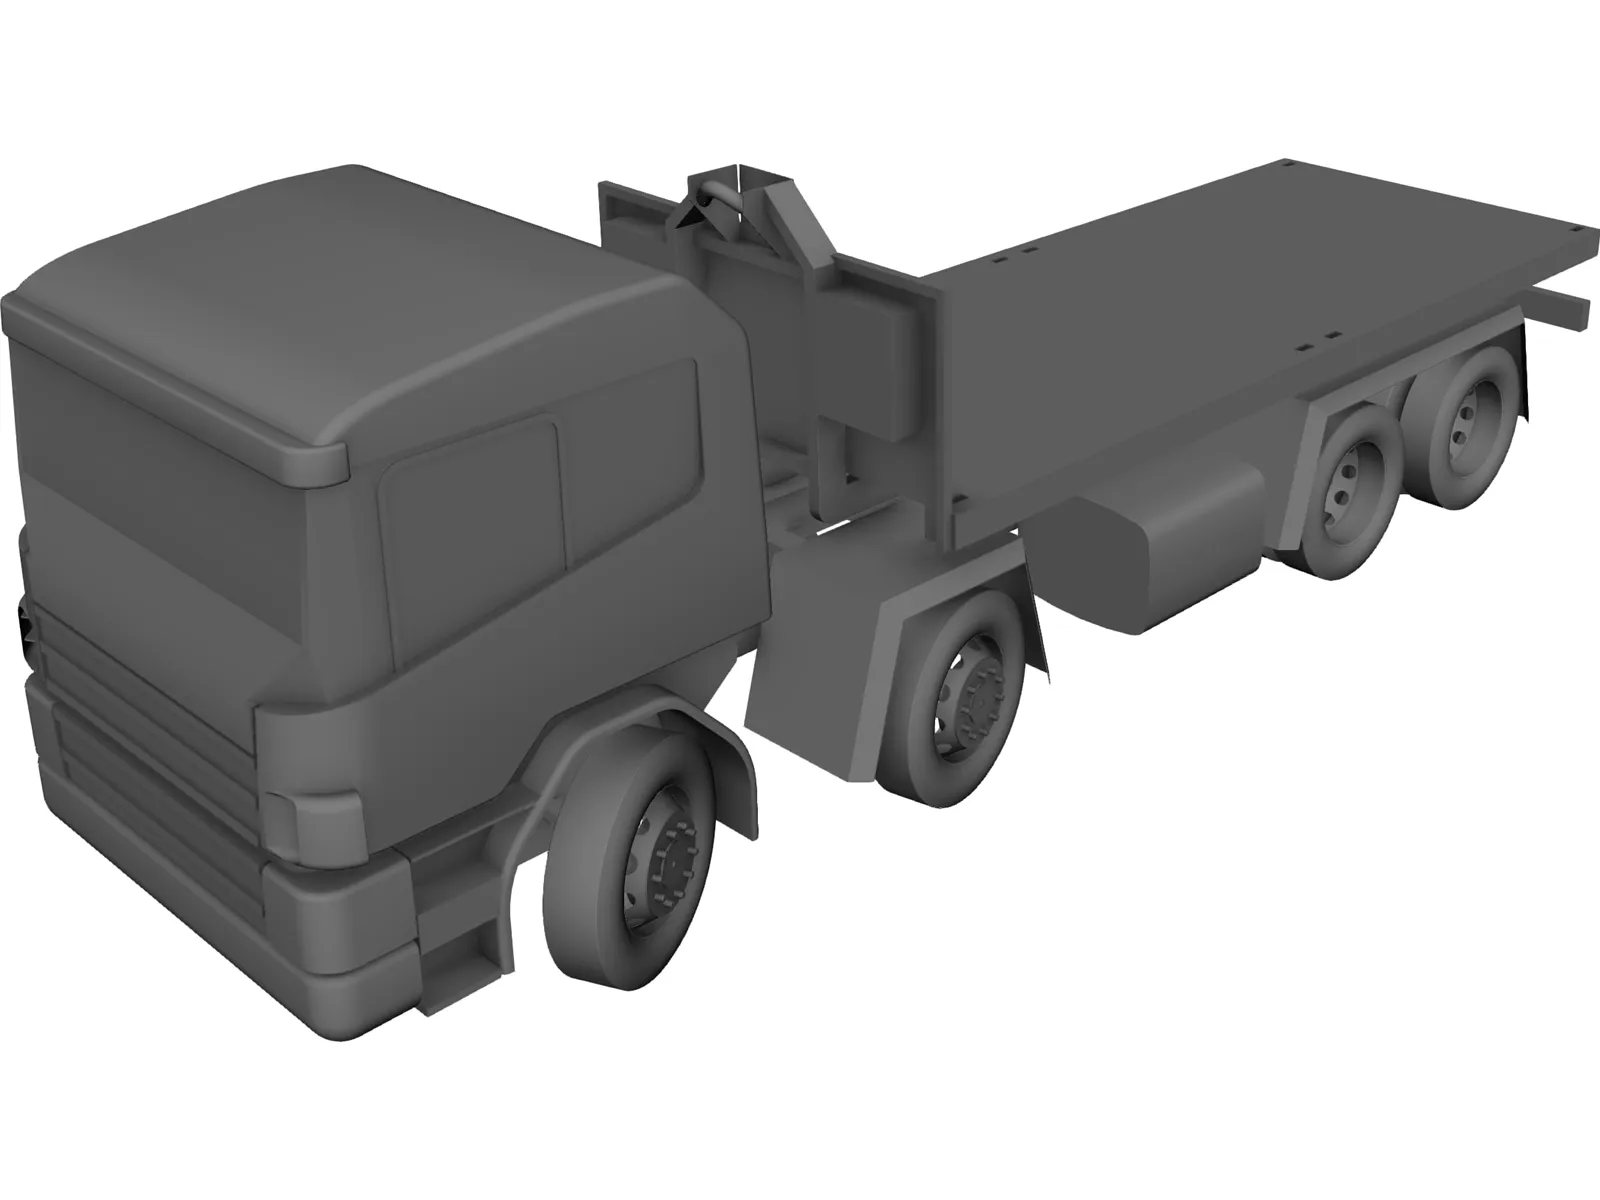 Scania 124 Military Protected 3D Model